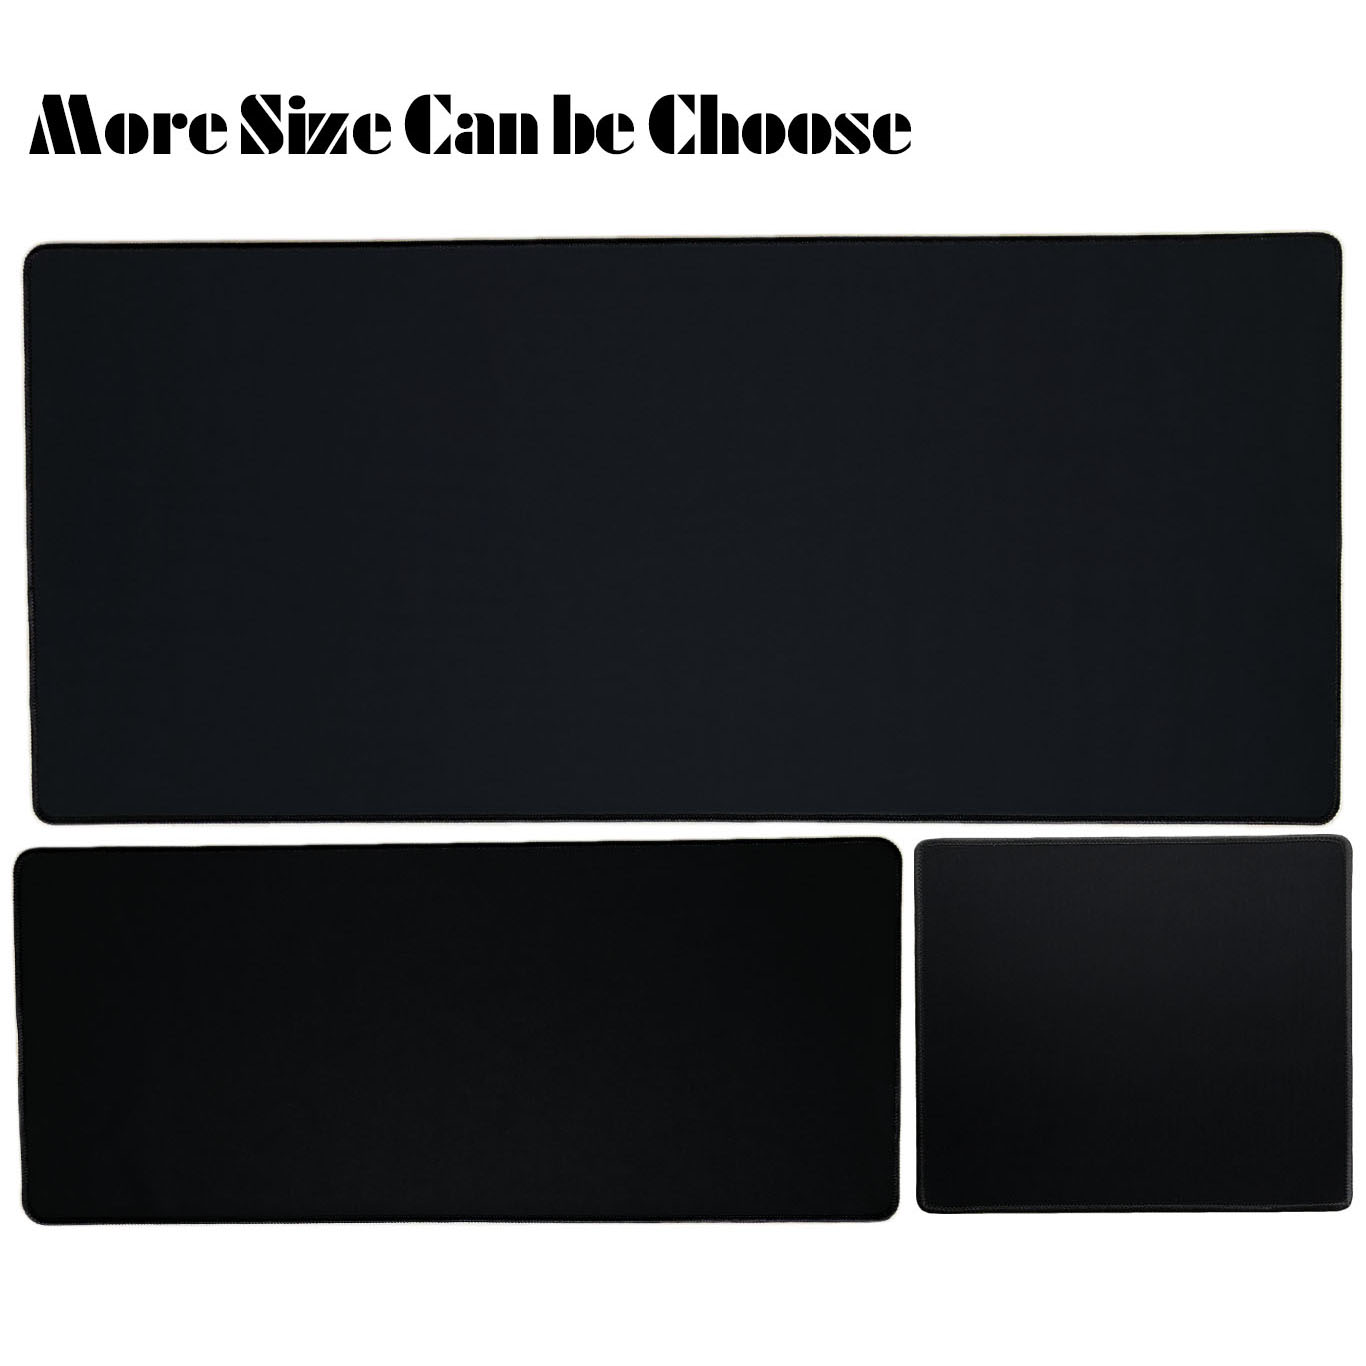 Extra Large Gaming Mouse Pad For Computer Gamer,Laptop Notebook Medium/Small Keyboard Carpet Mouse Mat Non-Slip Rubber Table Rug